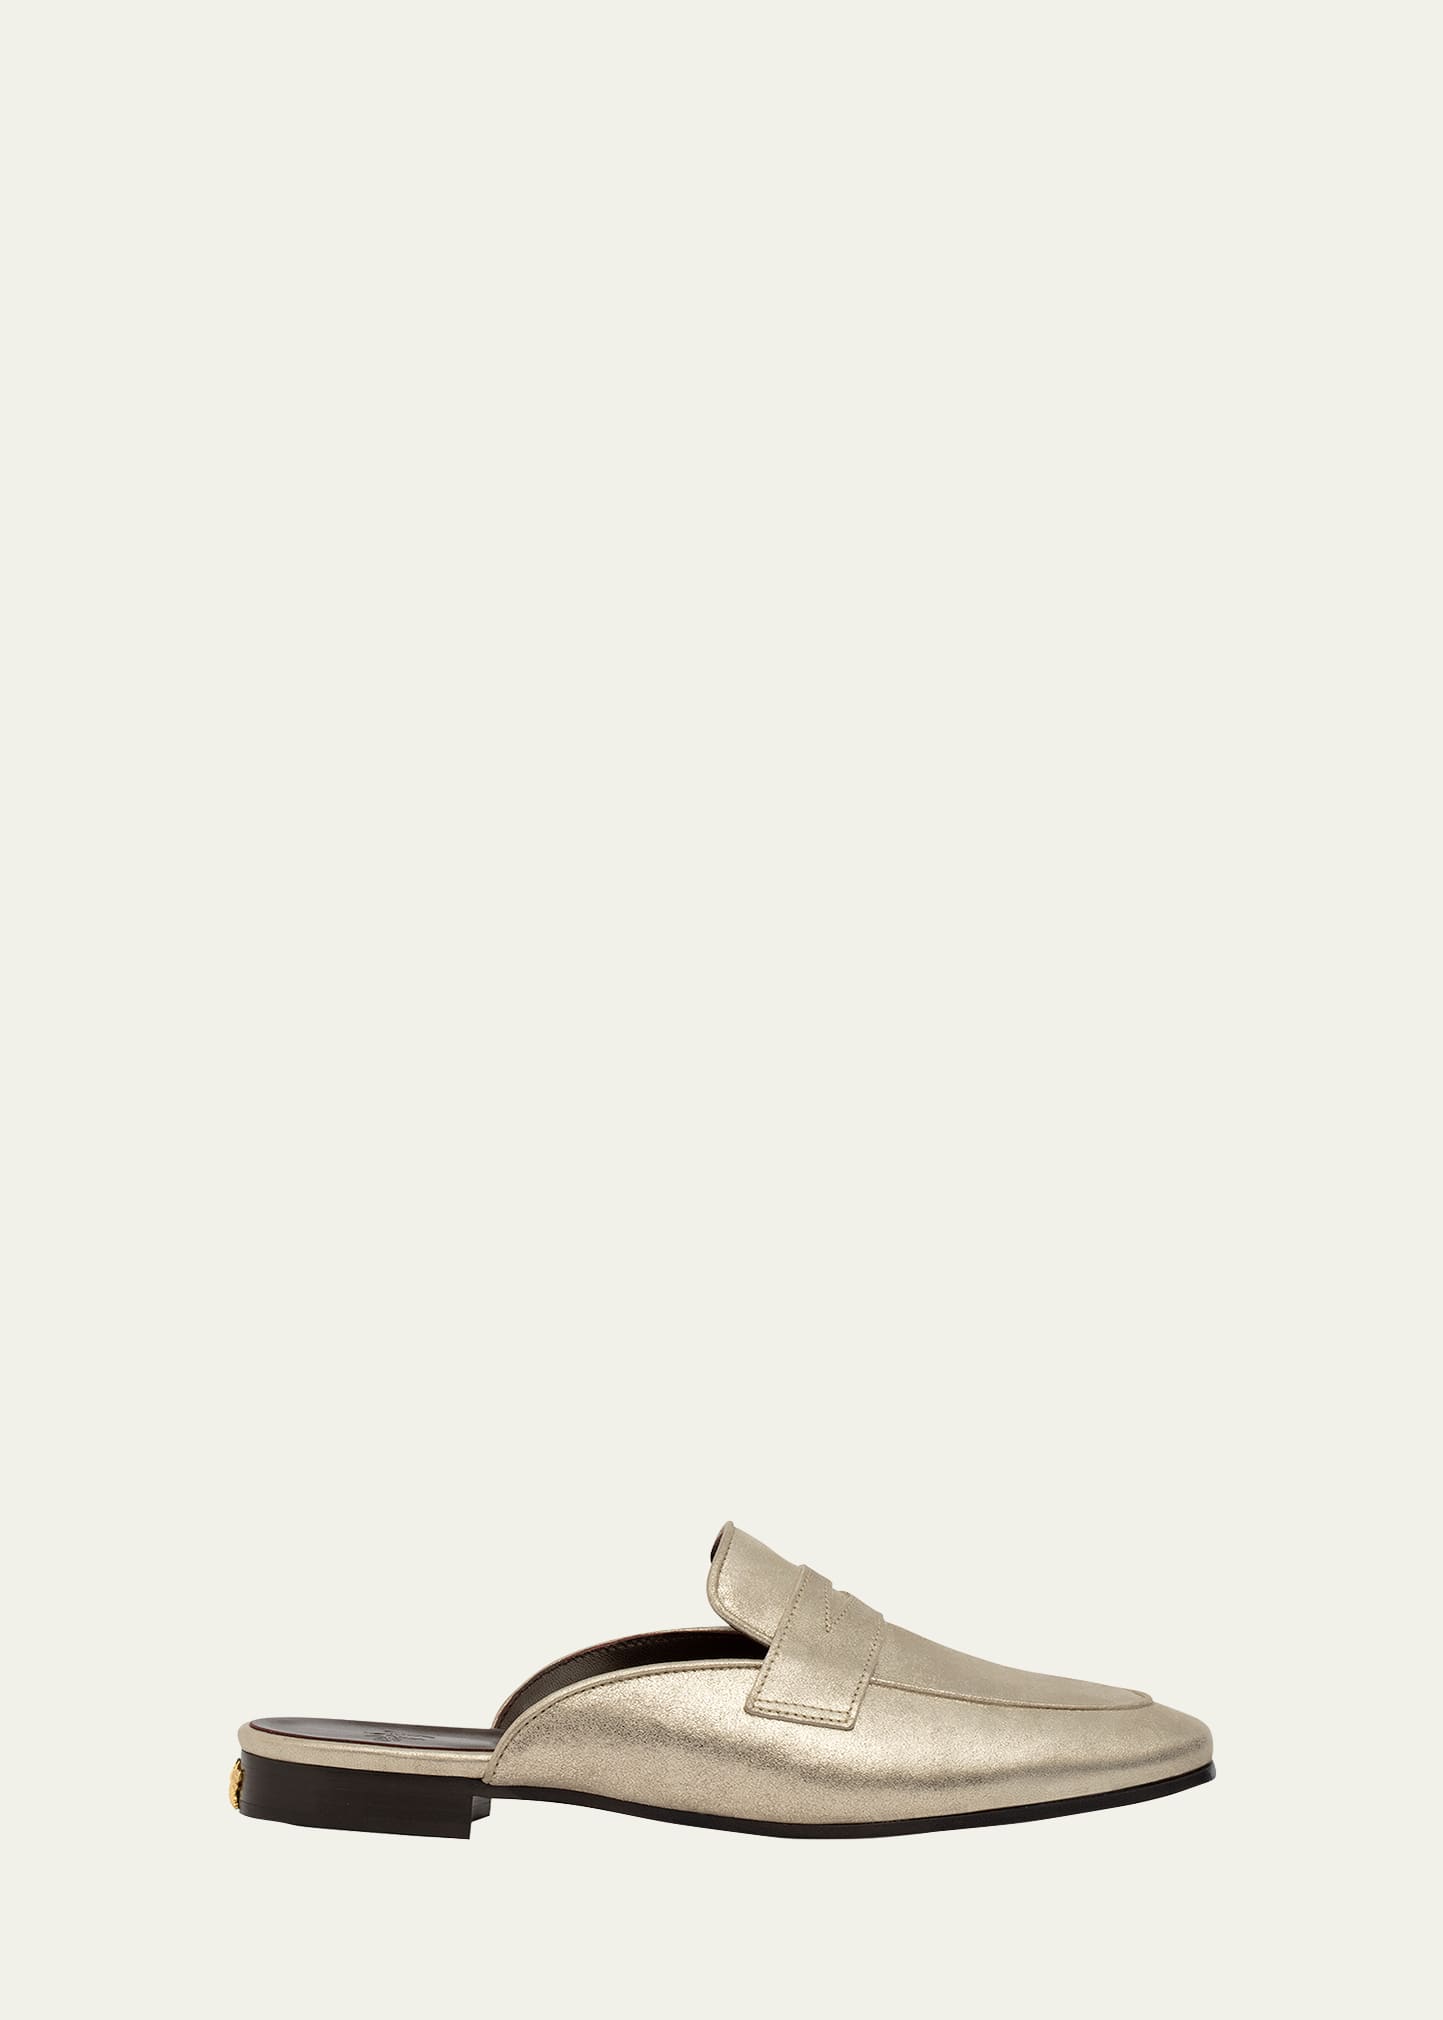 Bougeotte Metallic Penny Loafer Mules